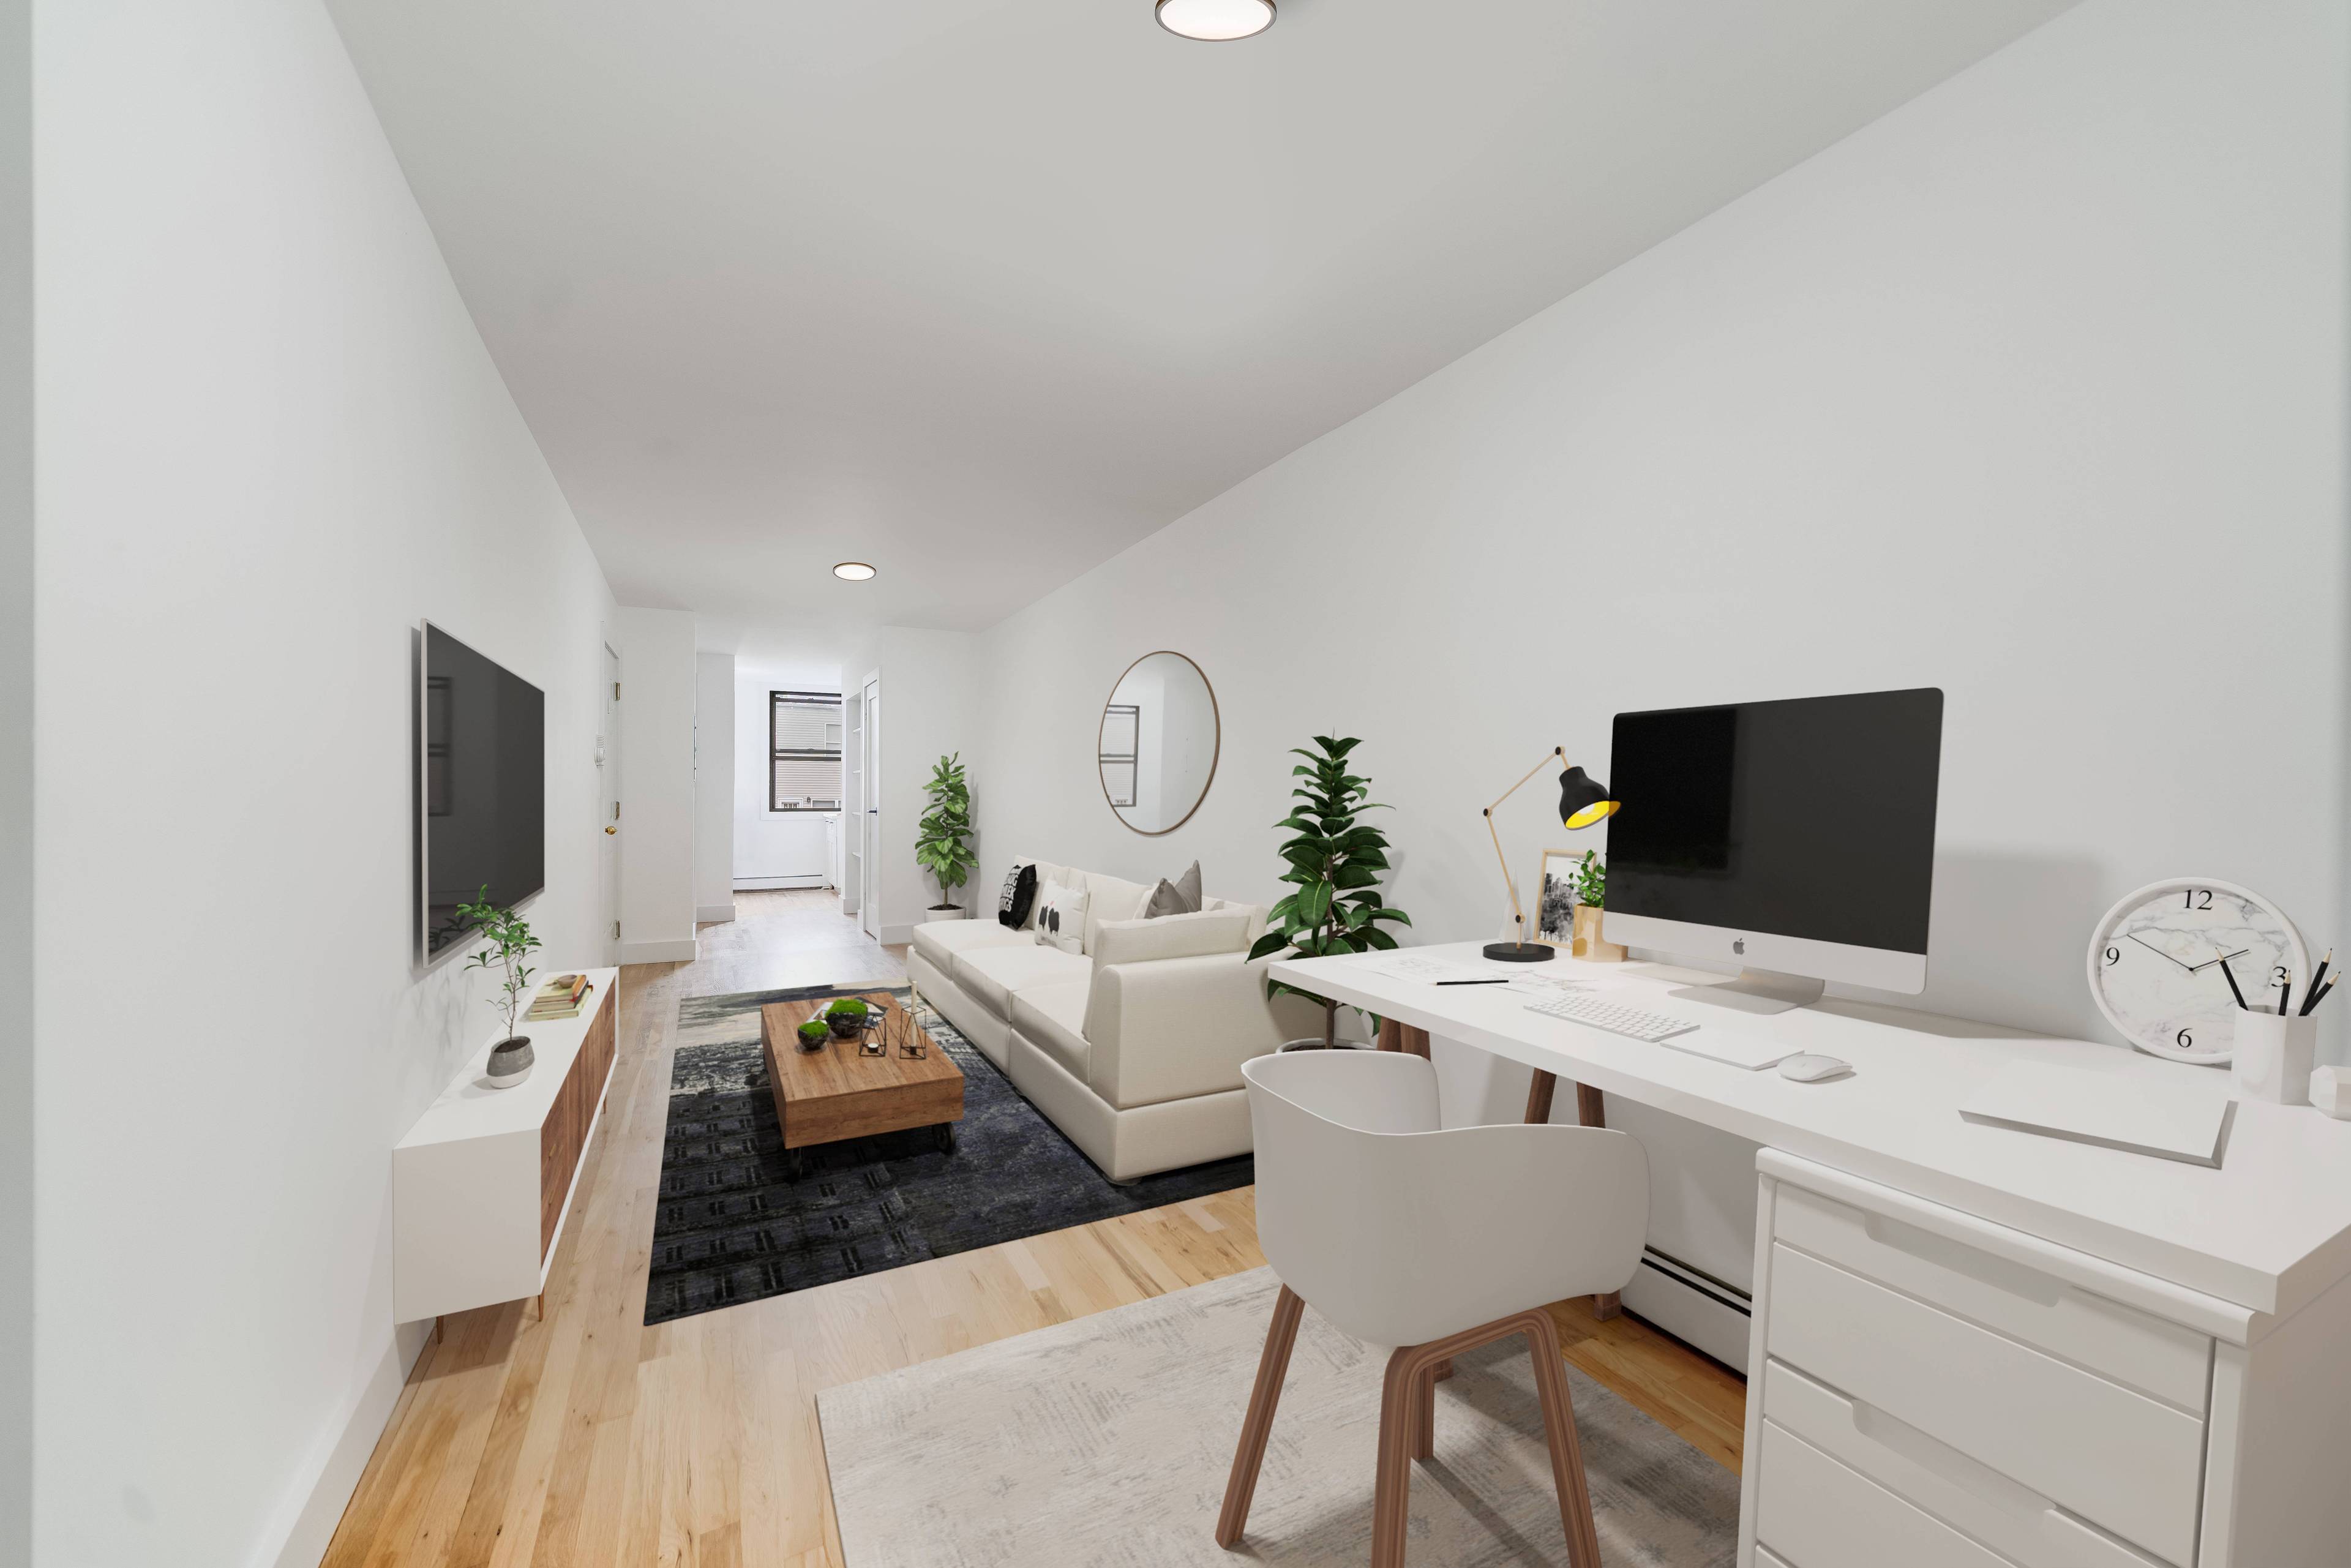 Open 1 Bedroom Apartment located in Downtown Hoboken NJ.  Renovated with a Washer/Dryer Combo Machine In Unit.  Dishwasher, Stainless Steel Appliances.  No Brokers Fee